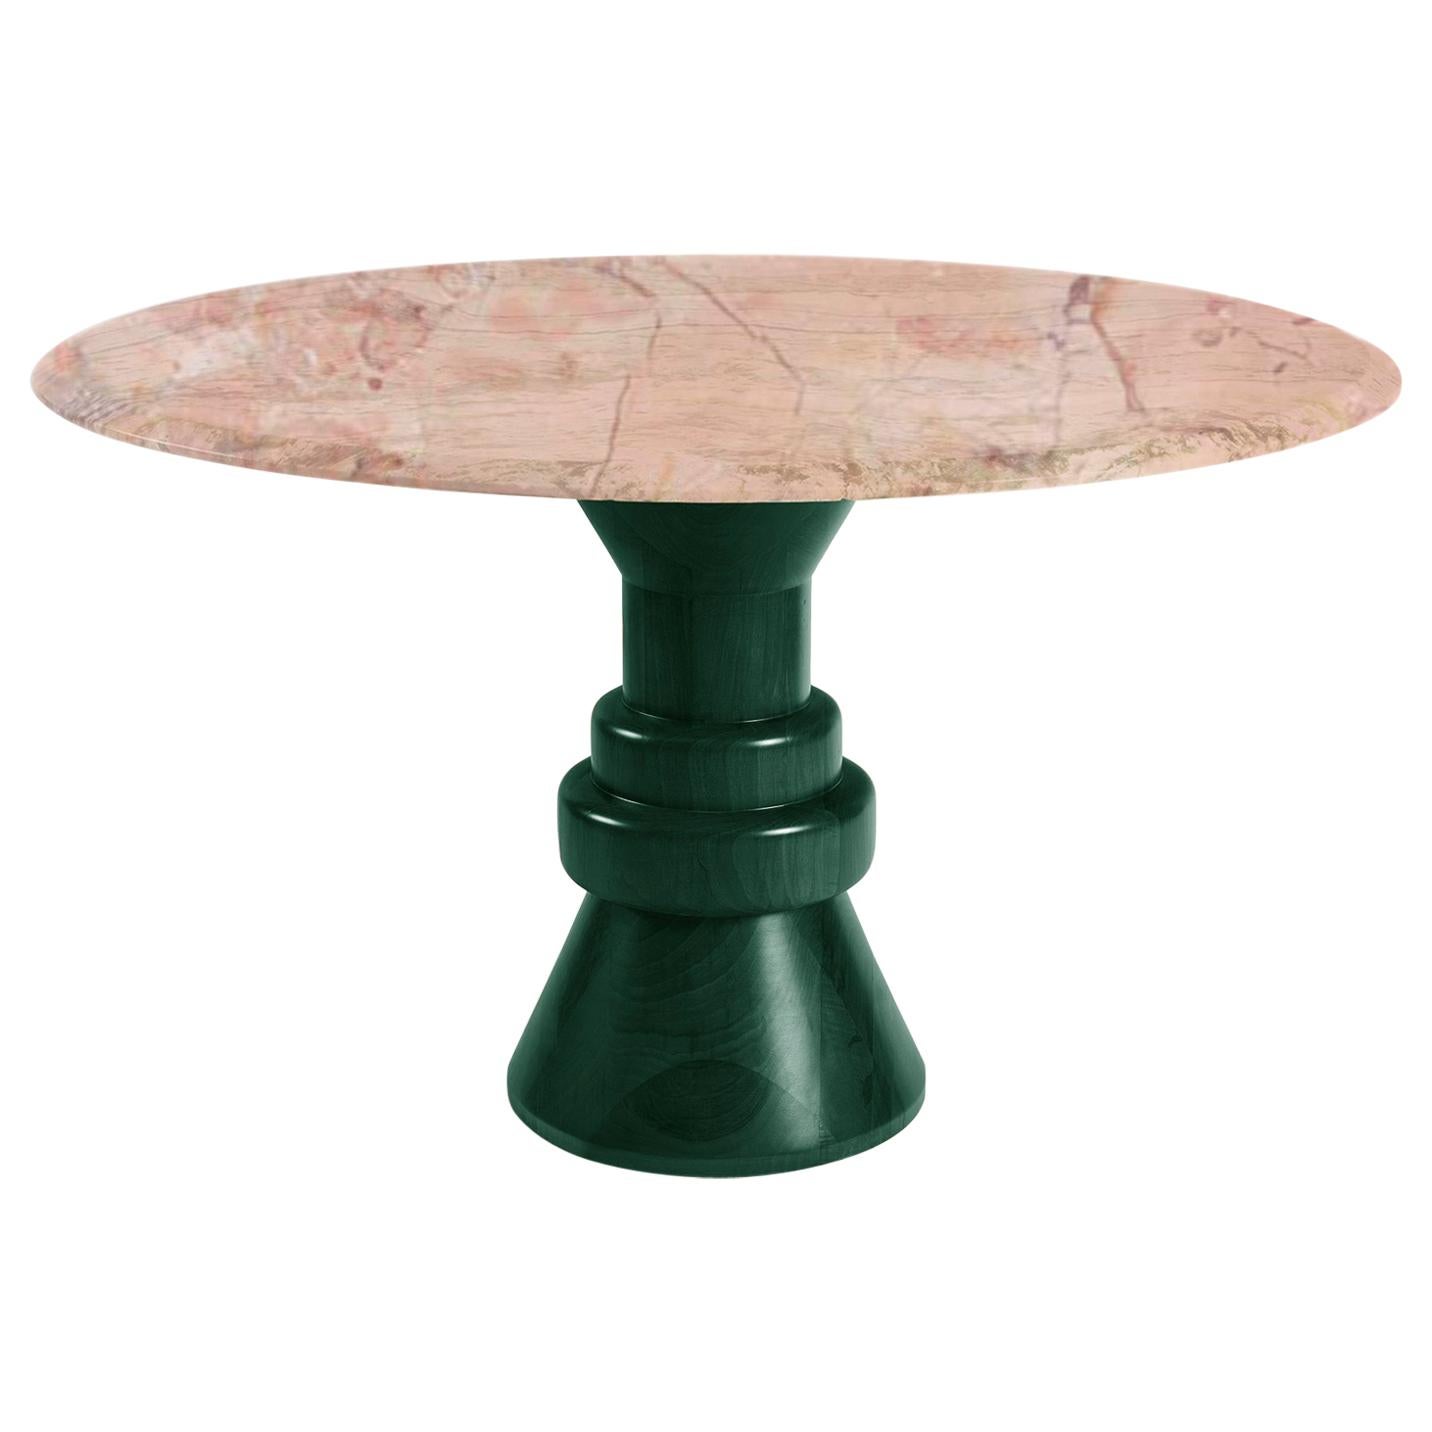 21st Century Pink Marble Round Dining Table with Sculptural Green Wooden Base